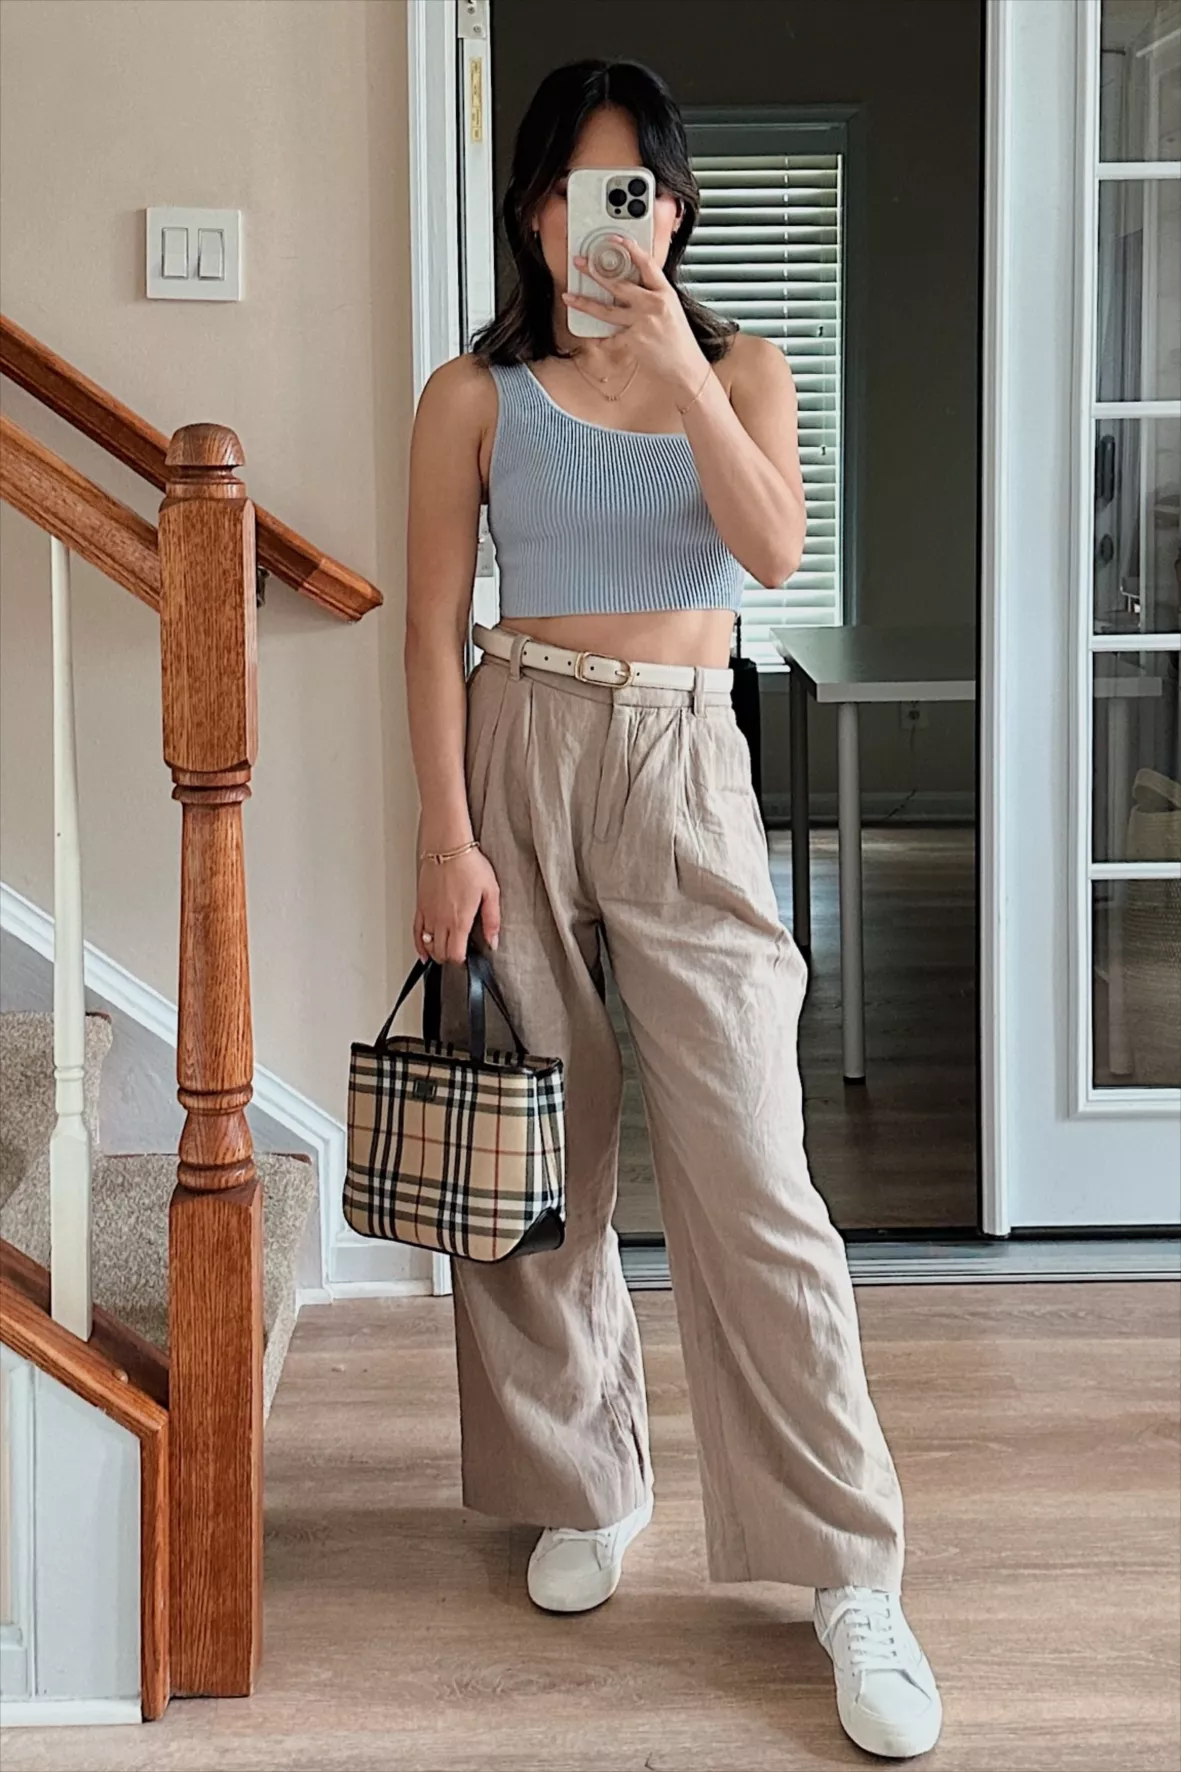 burberry bag outfit